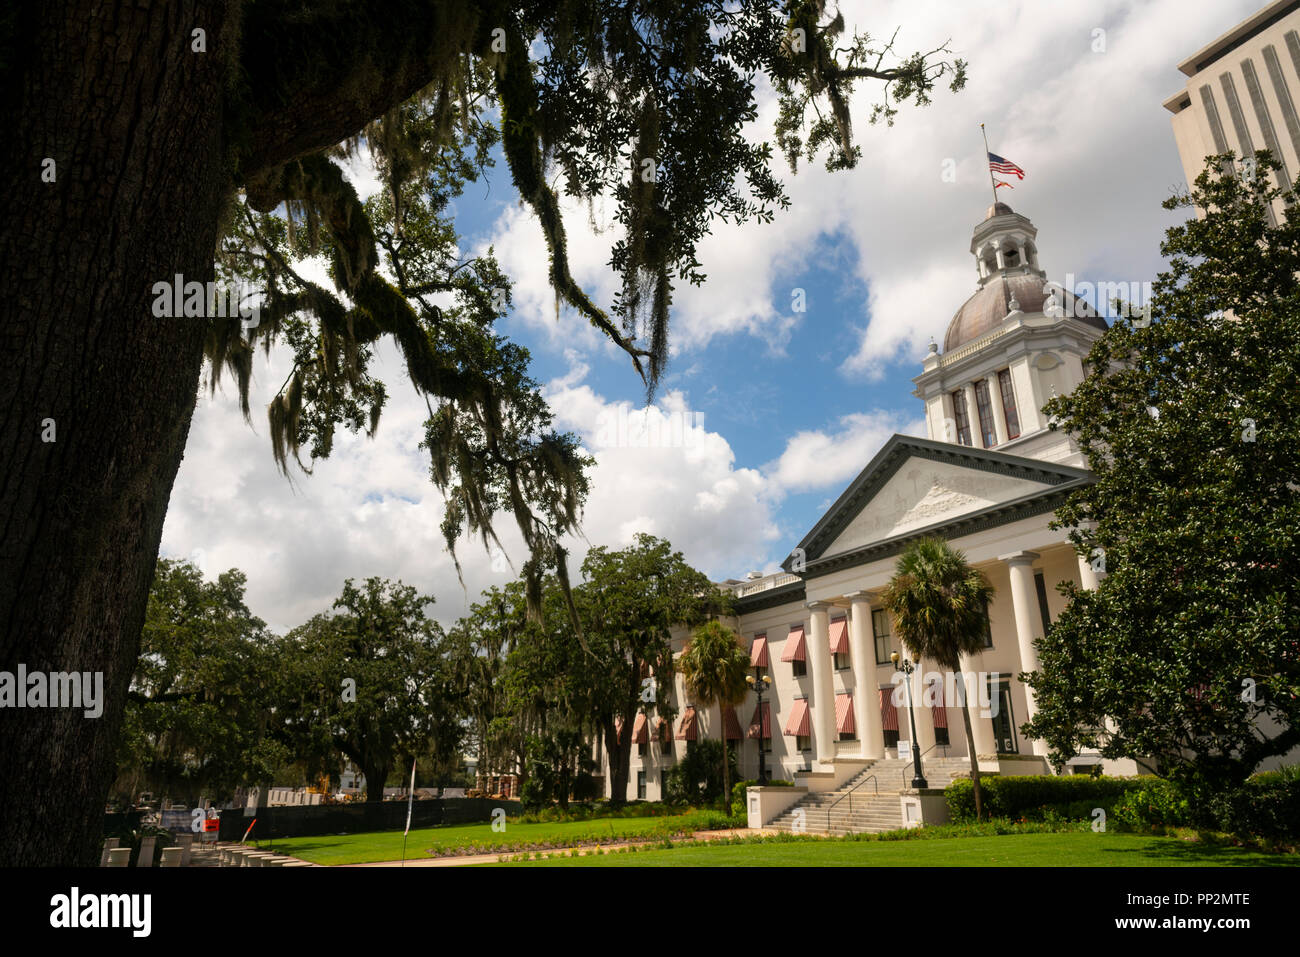 Security Barriers Protect The State Capital Building in Tallahassee Florida Stock Photo